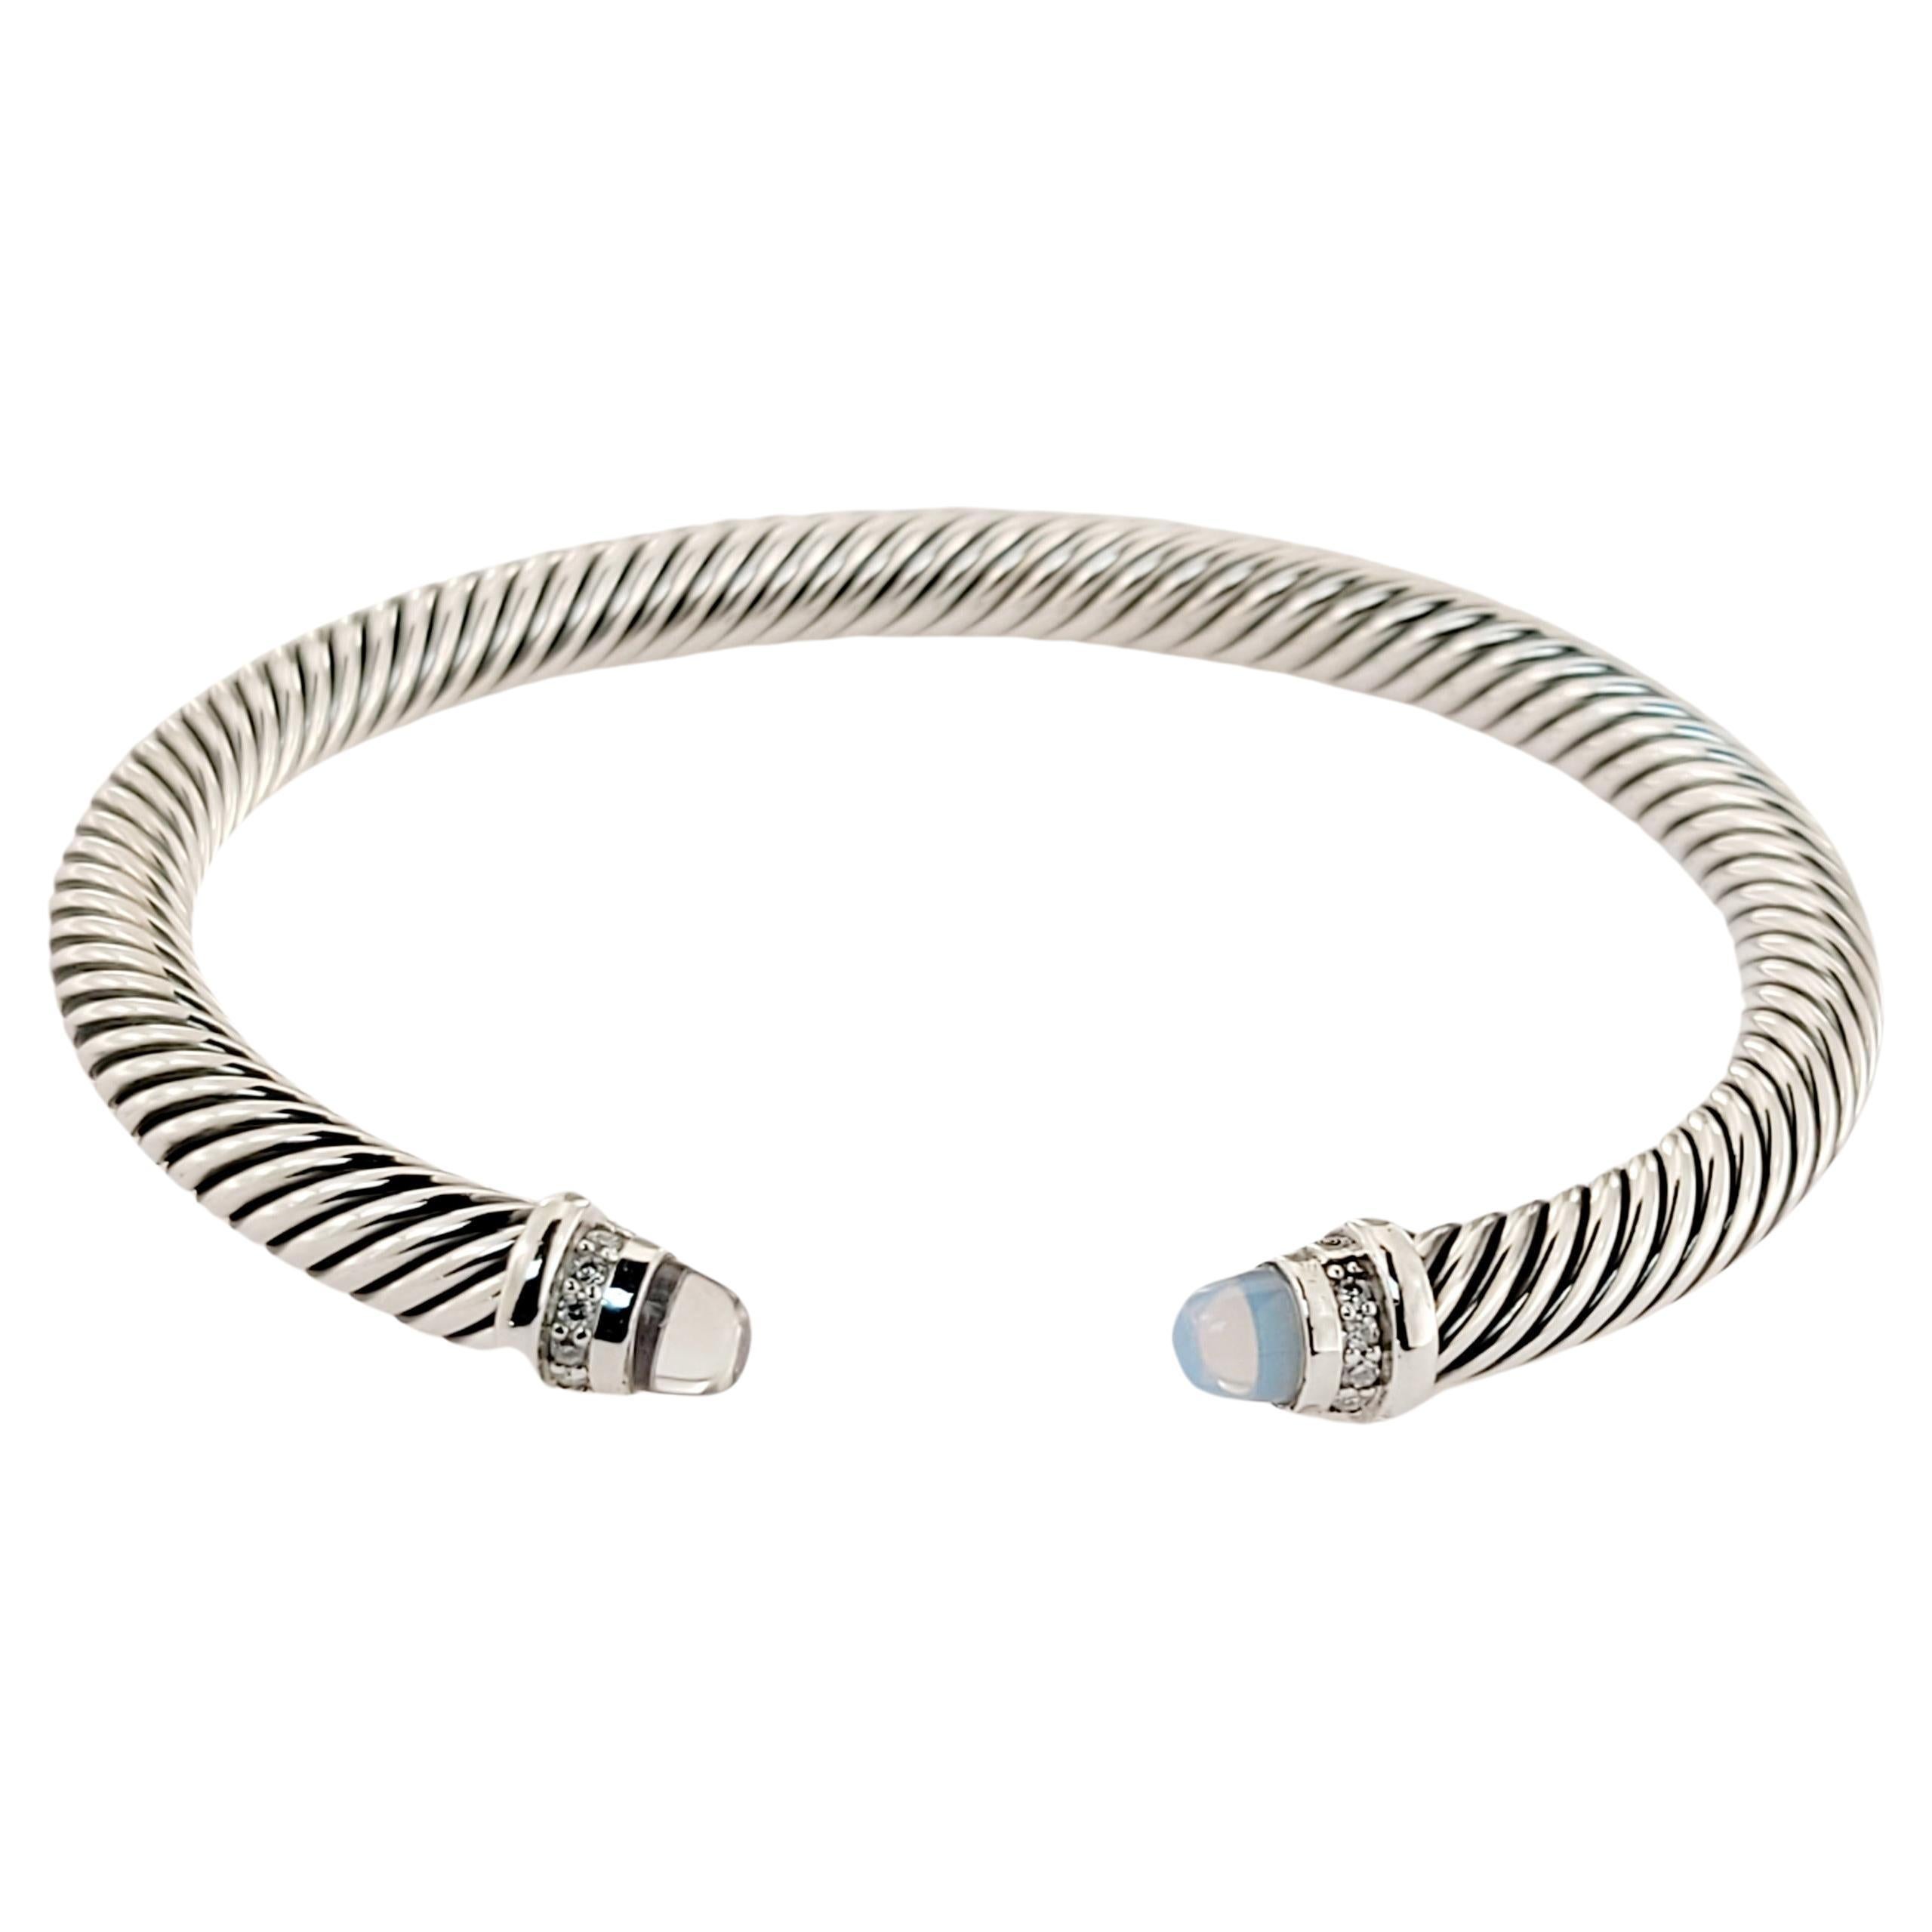 David Yurman Sterling Silver 5mm Cable Bracelet Moonstone and Diamonds. For Sale